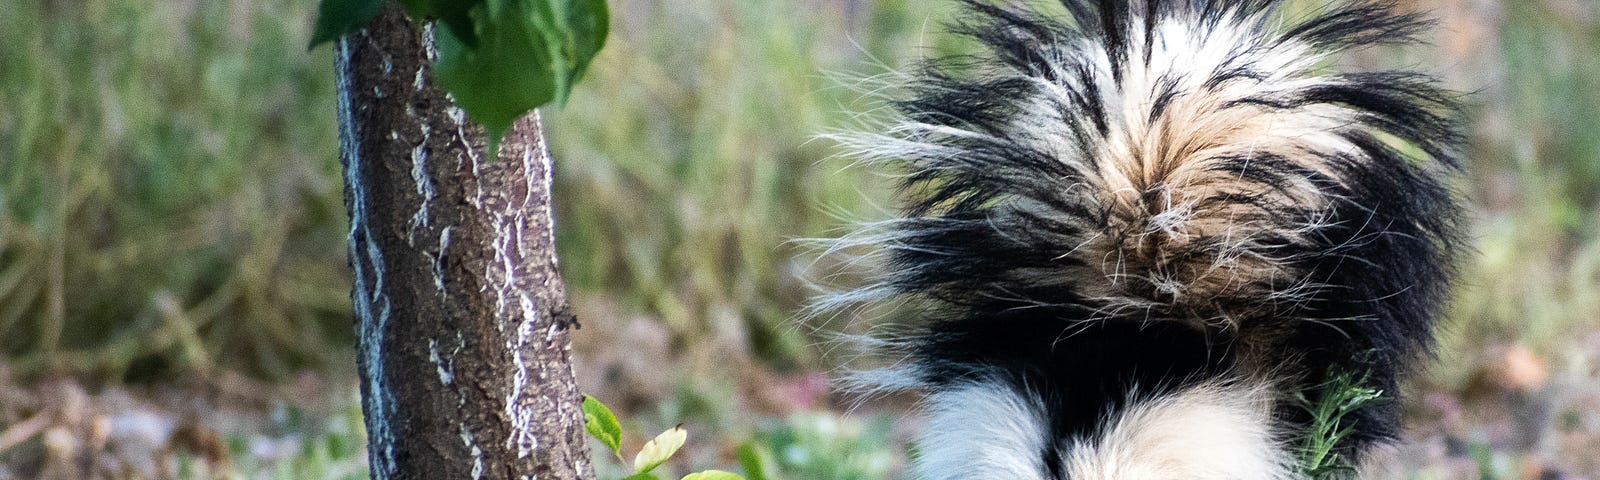 Photo of a skunk for the Story Wild Life by Jonica Bradley